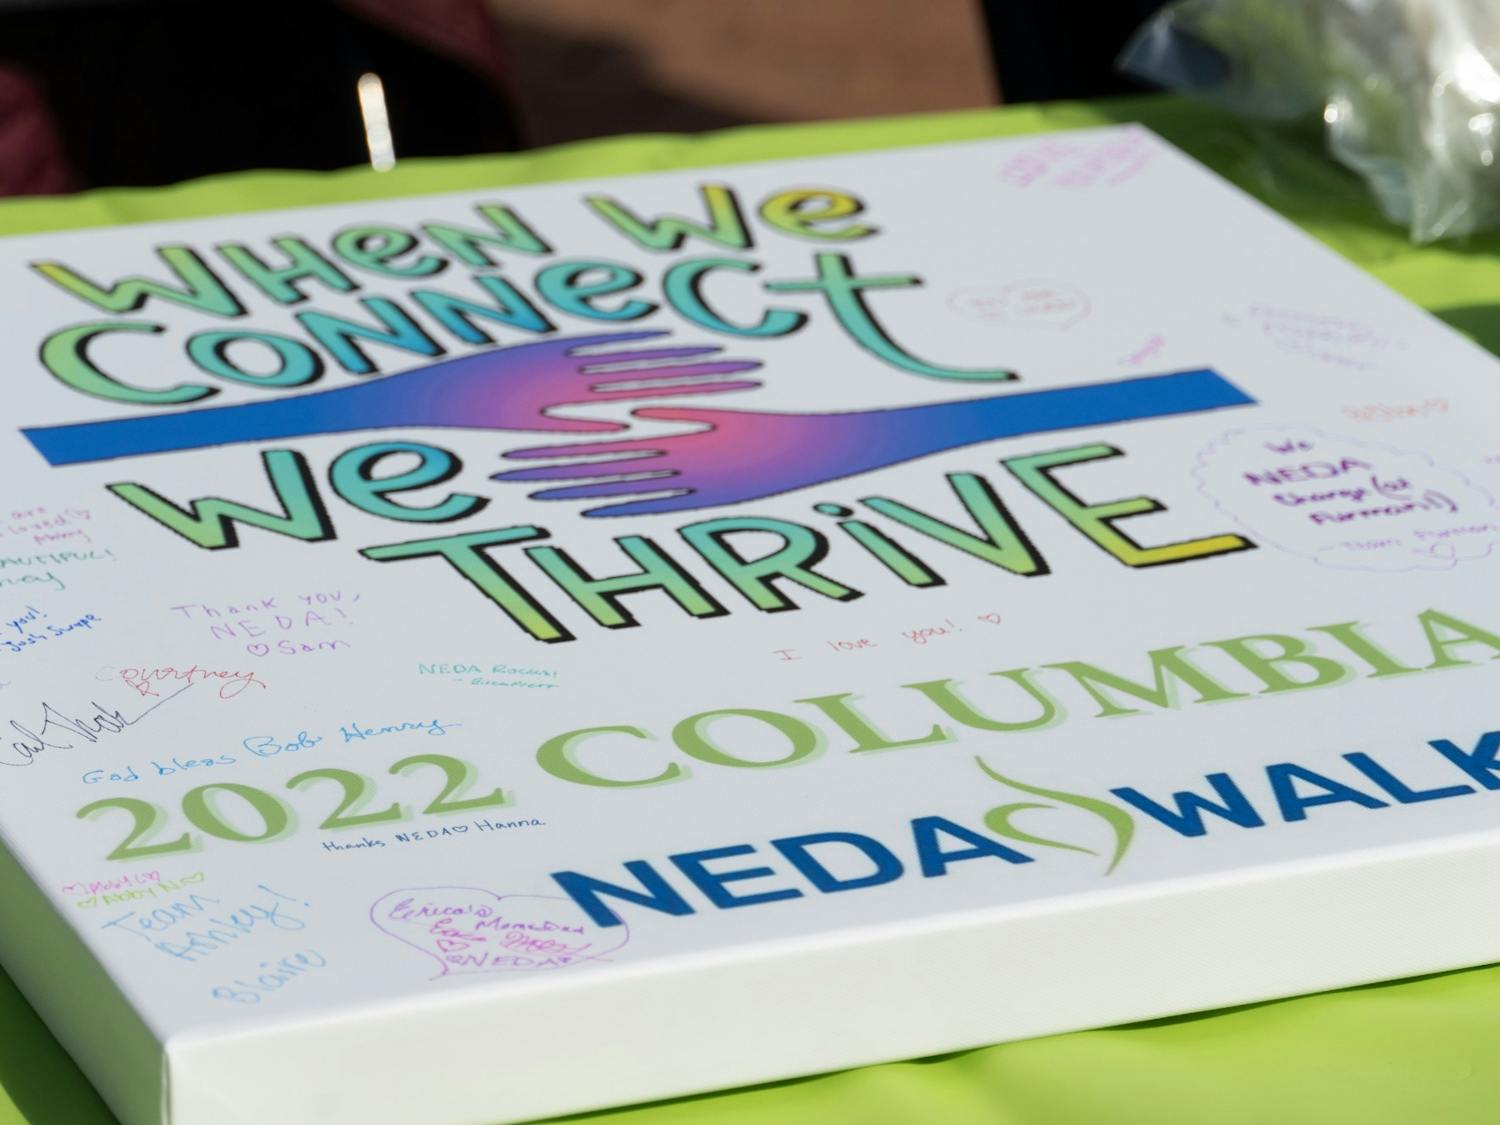 Signable poster board advertising the NEDA Walk on Saturday, 26 2022. The NEDA Walk took place as a charity event raise support and money for those who effected by eating disorders.